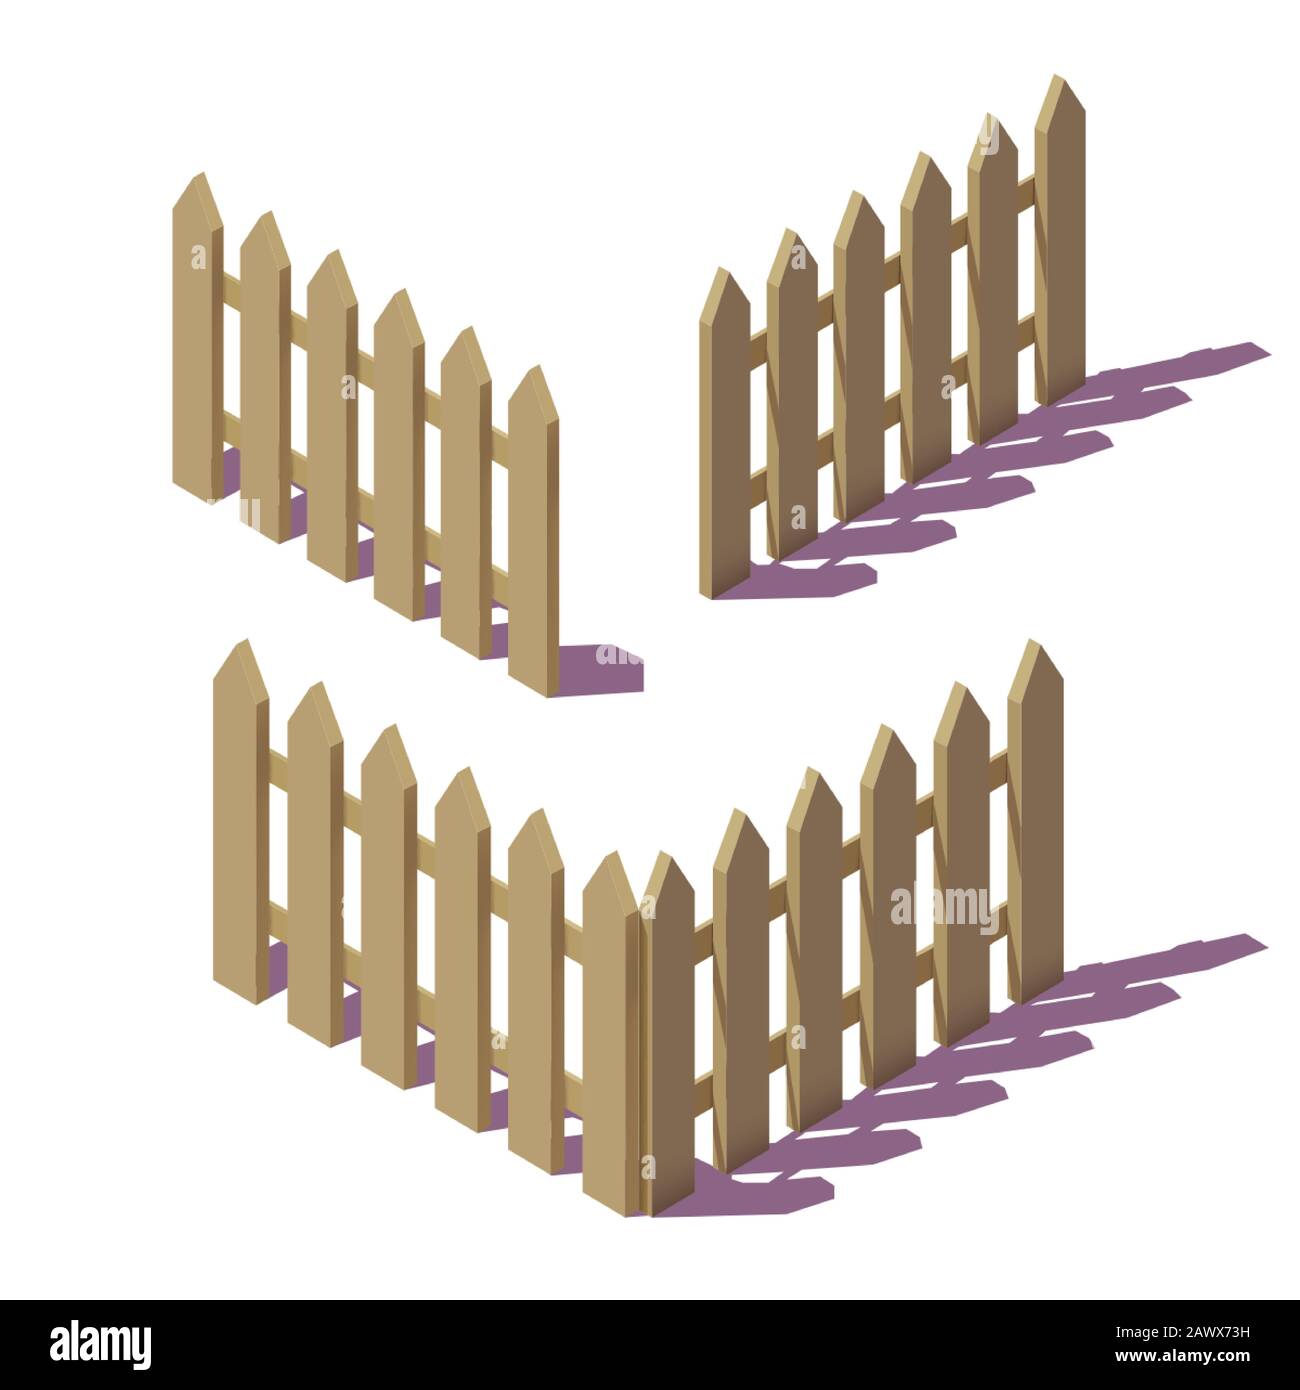 Wooden isometric fences. 3D realistic icons. Design elements isolated on white background. Vector illustration. Stock Vector